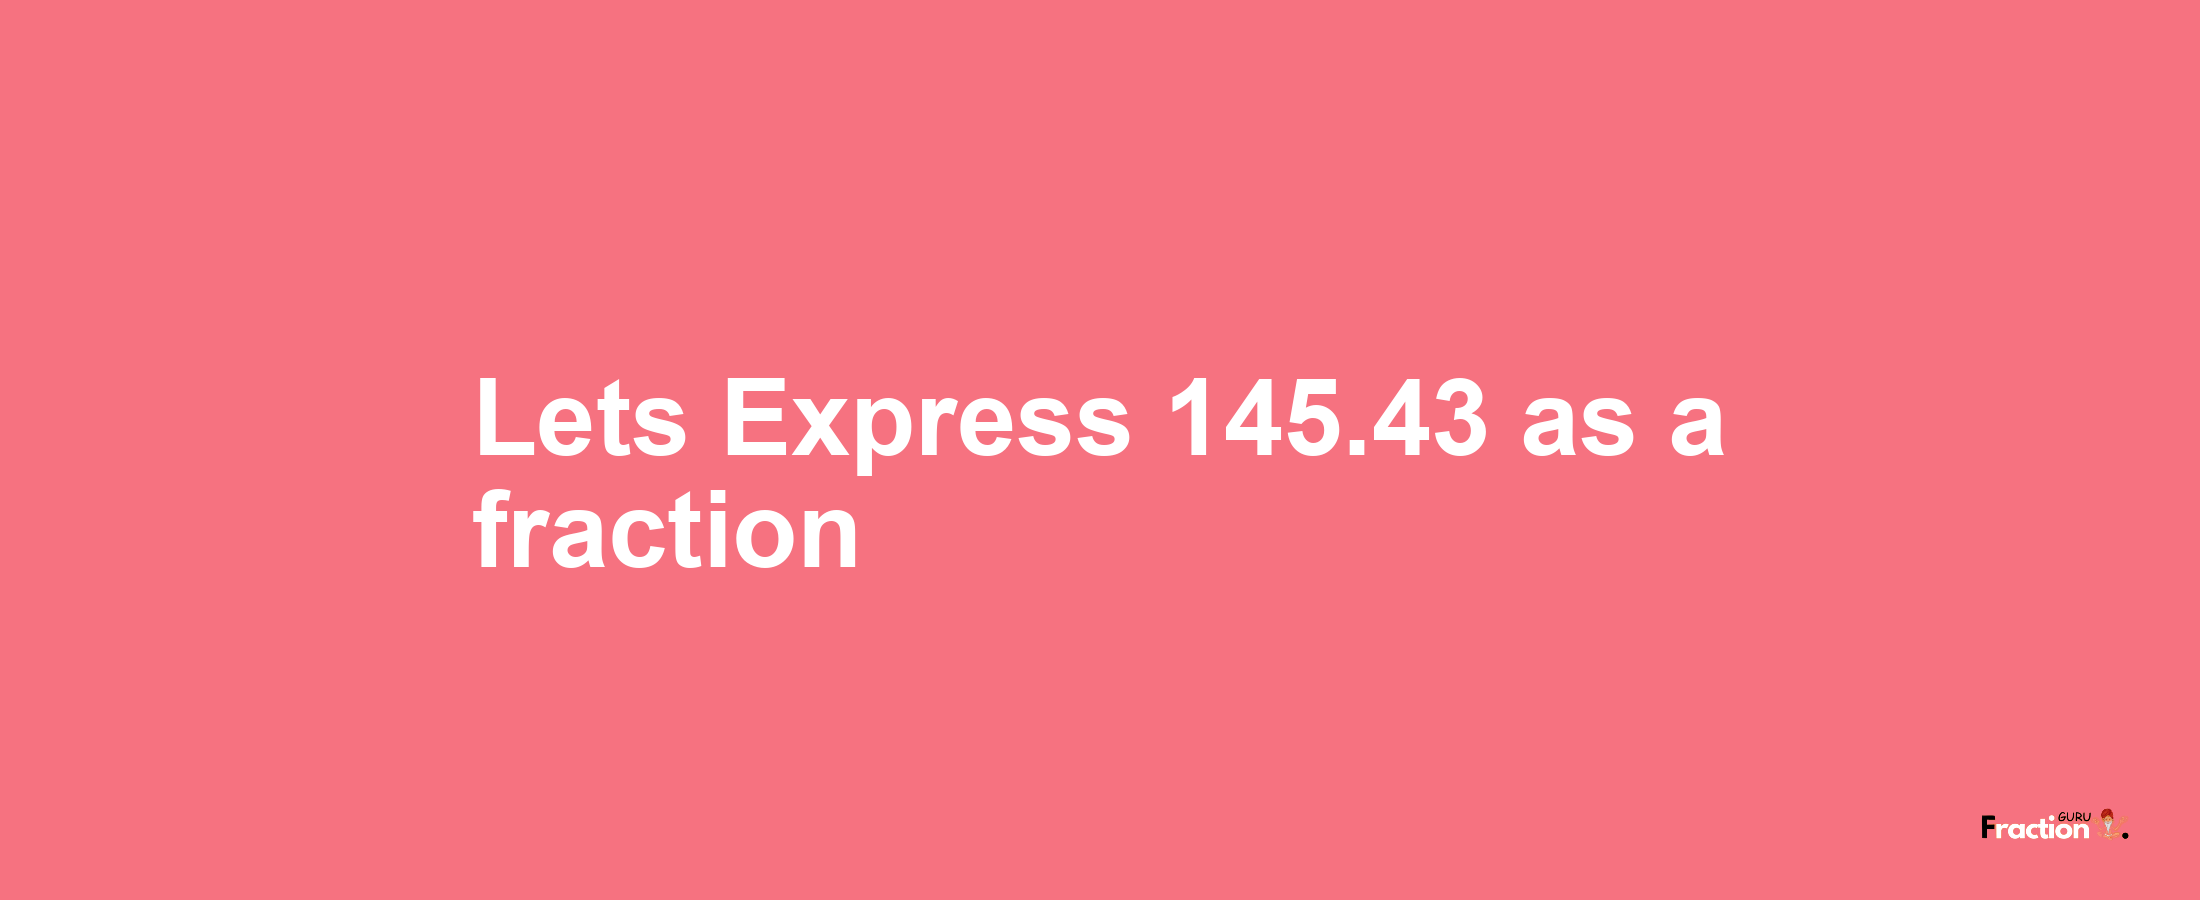 Lets Express 145.43 as afraction